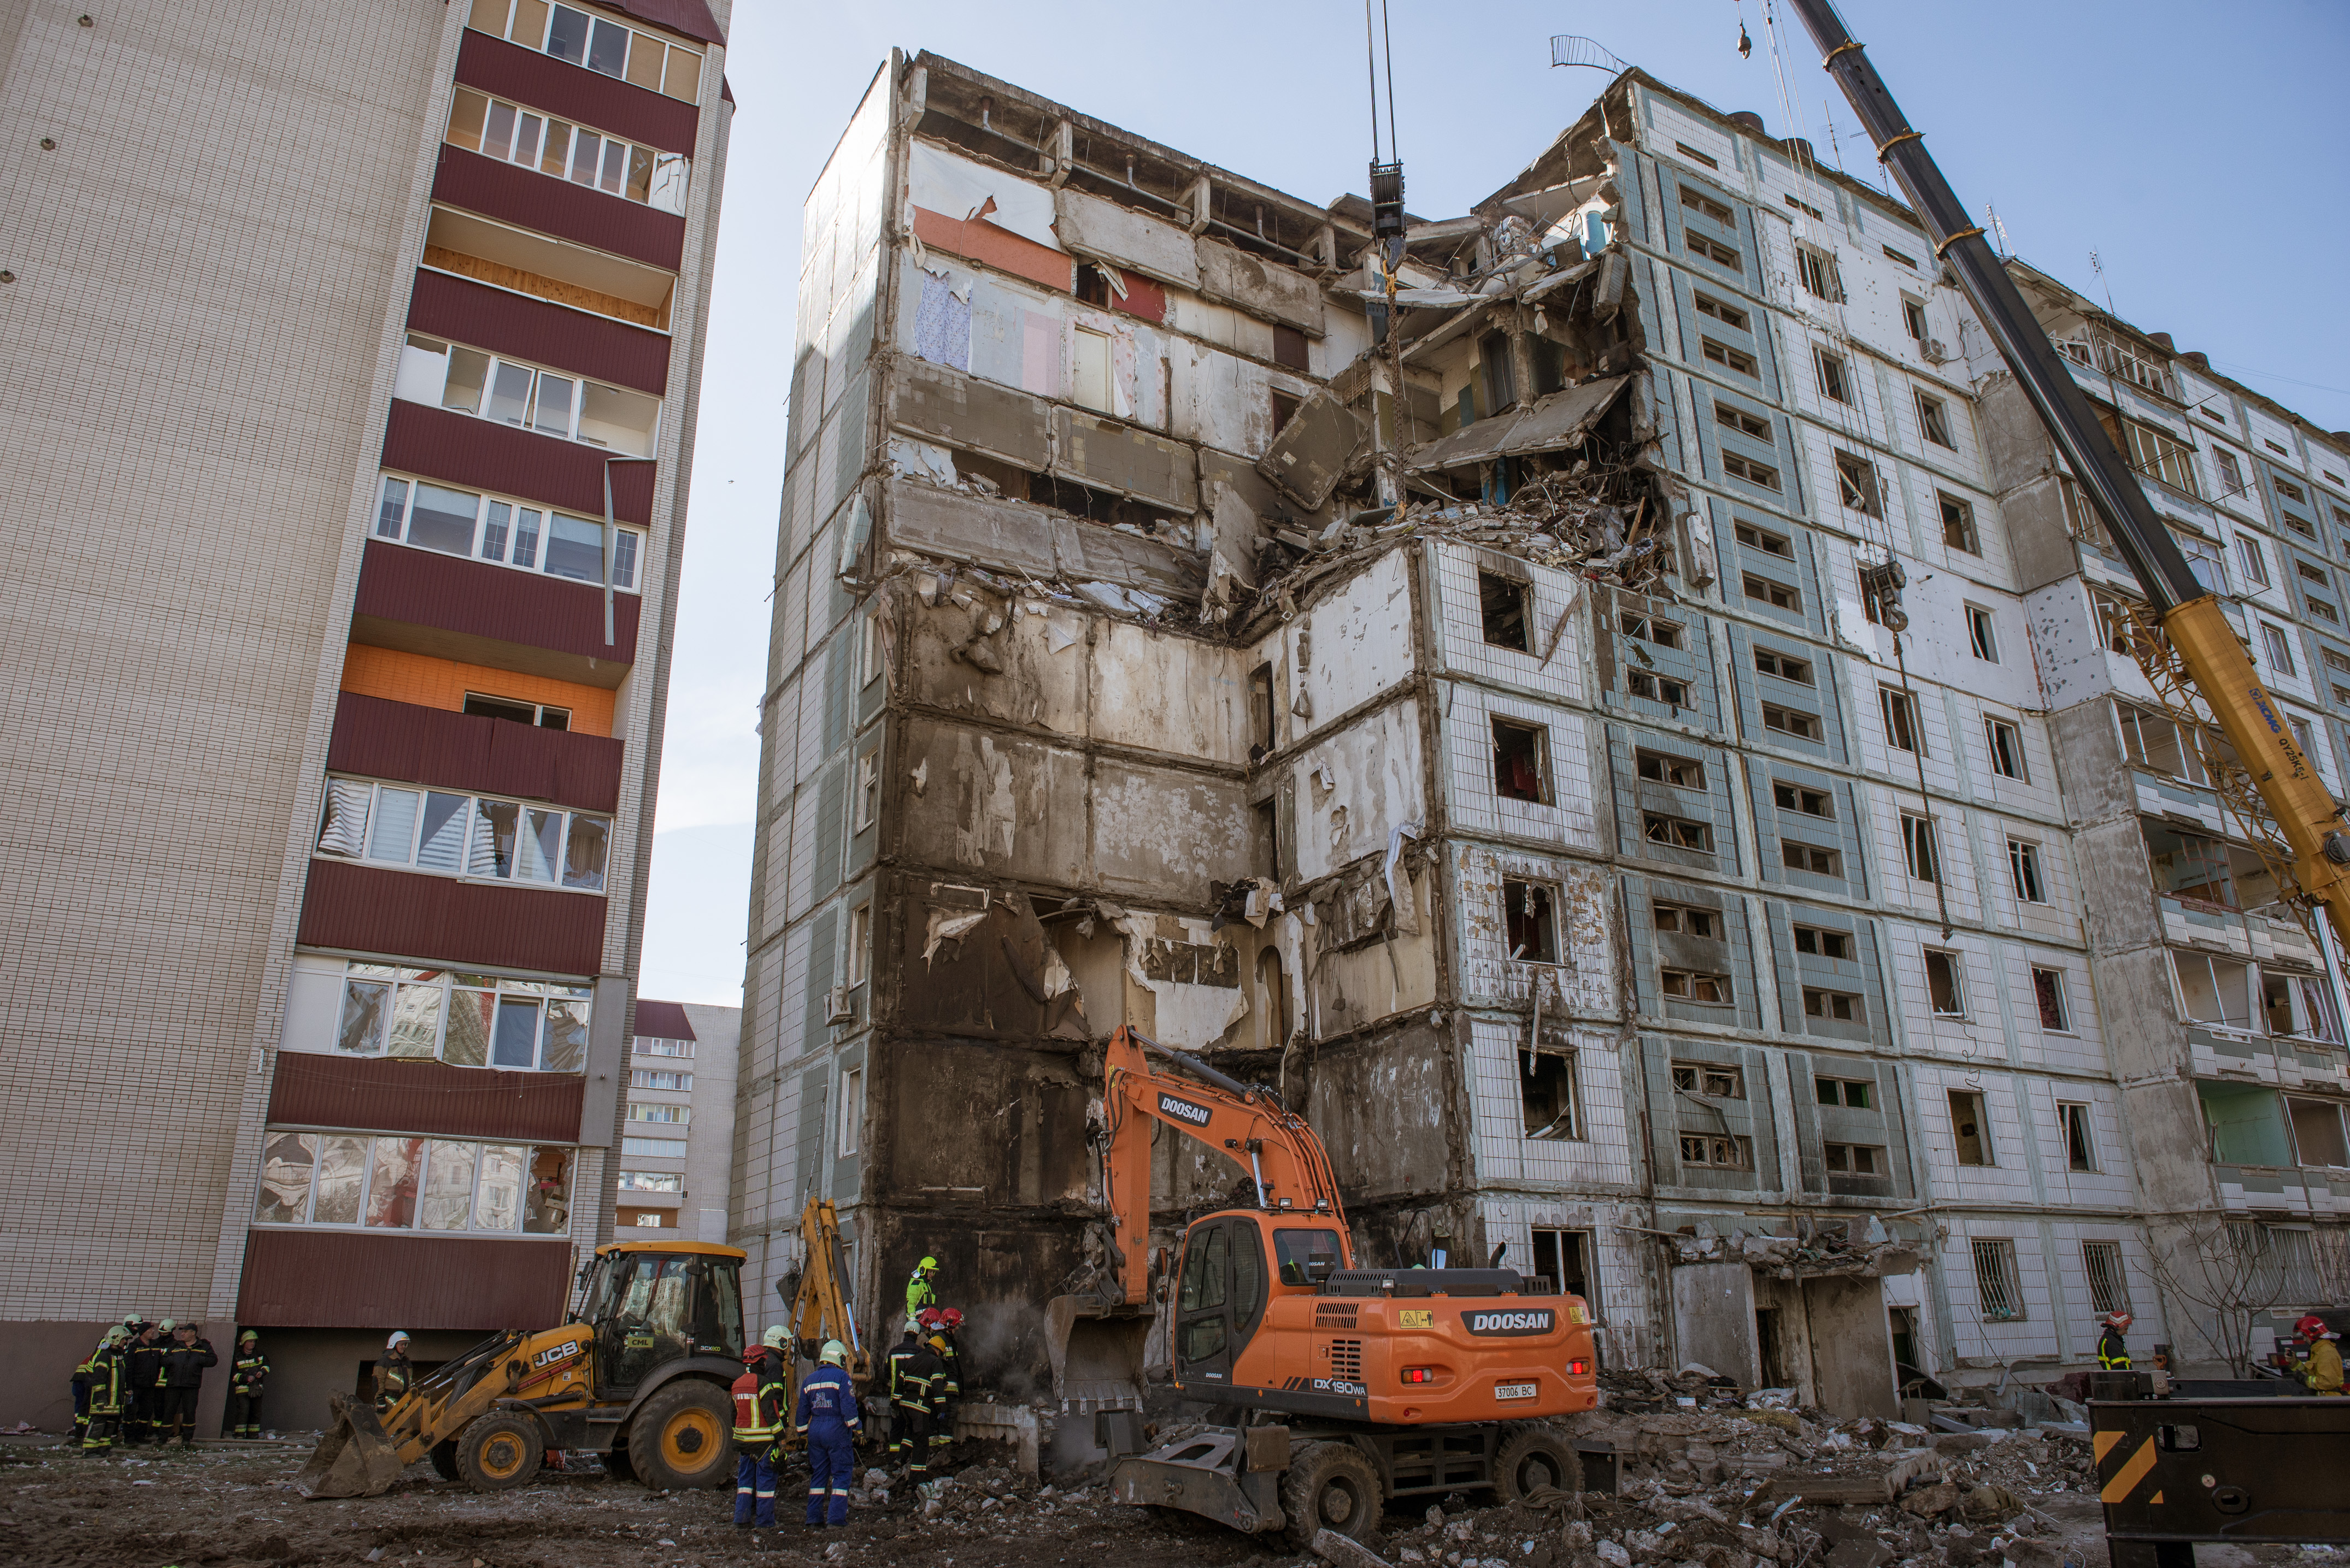 Firefighters and search and rescue teams conduct operation after Russian rocket hit residential building in Uman district located in Cherkasy Oblast, Ukraine, on April 28